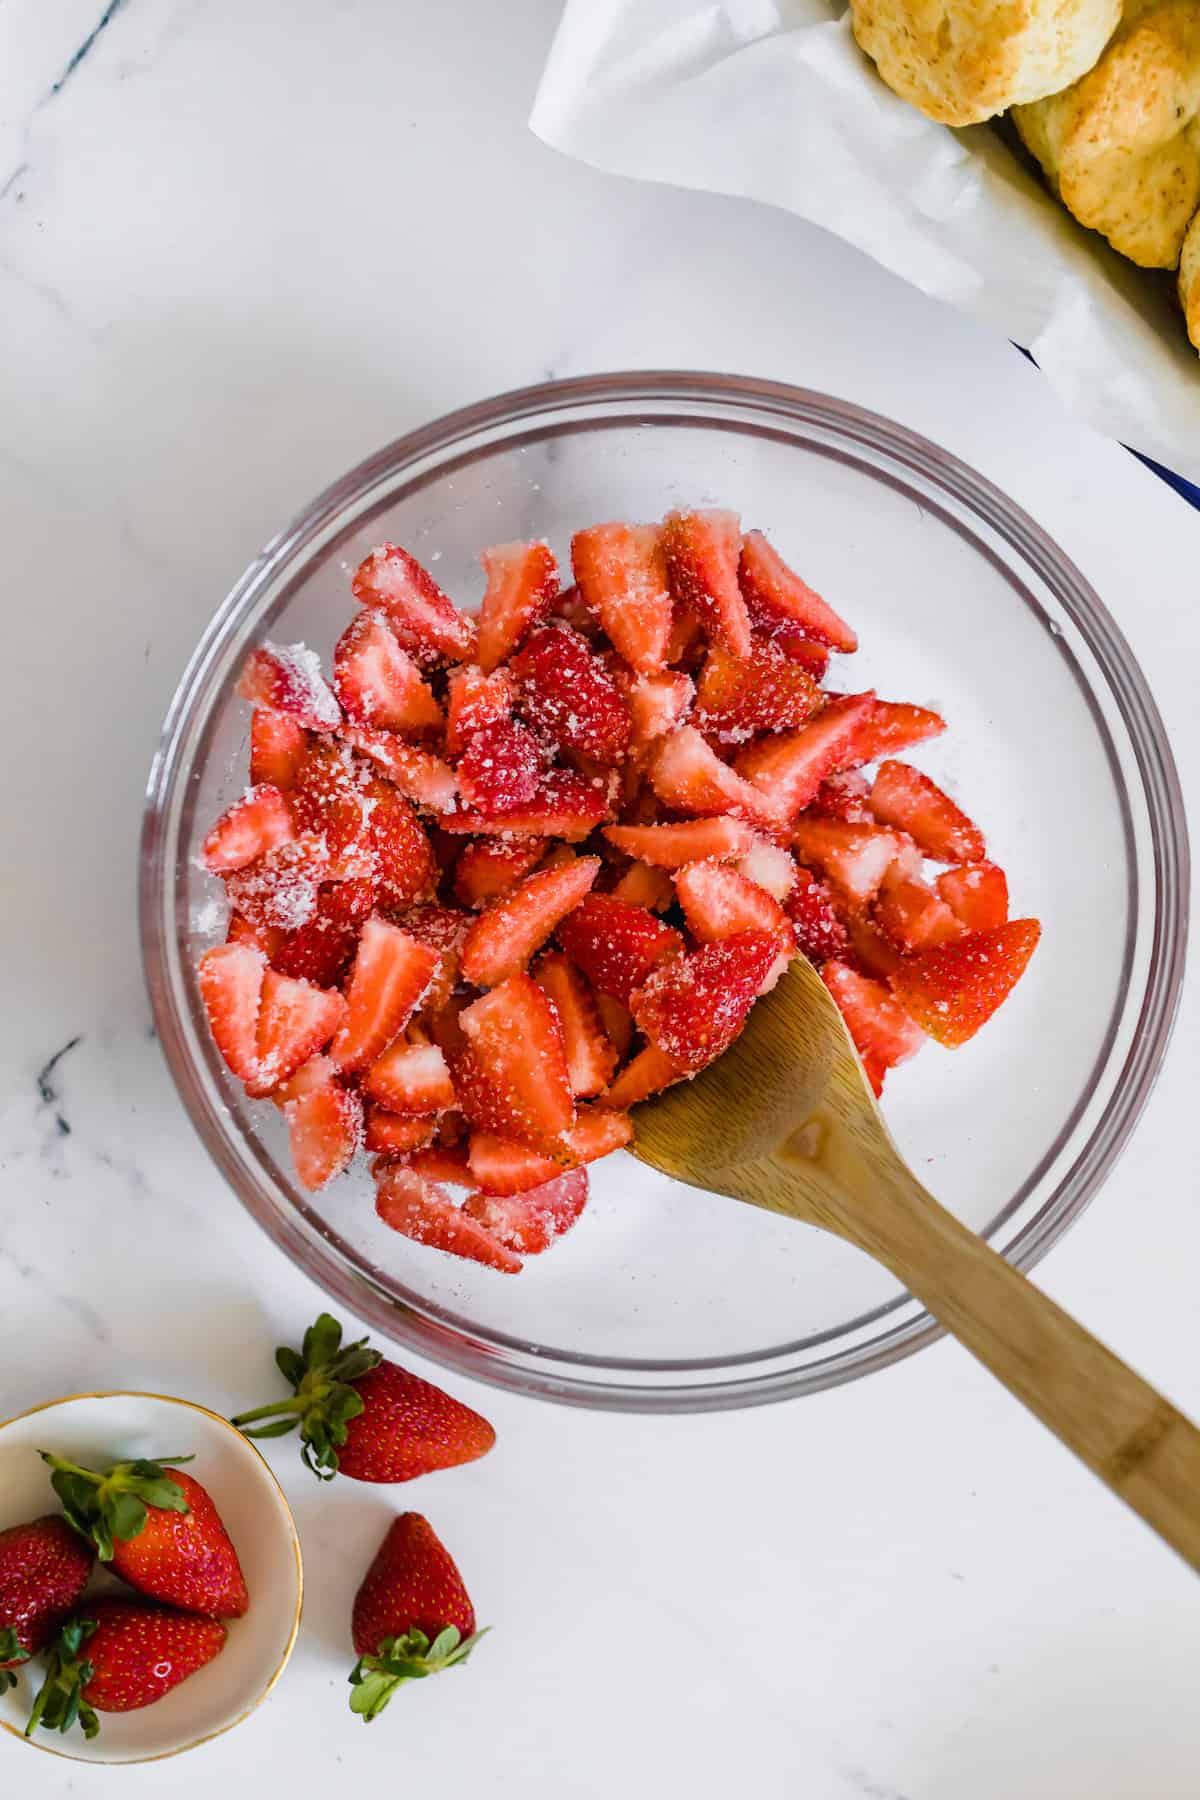 Strawberries in a Bowl with Sugar and a Wooden Spoon for Mixing